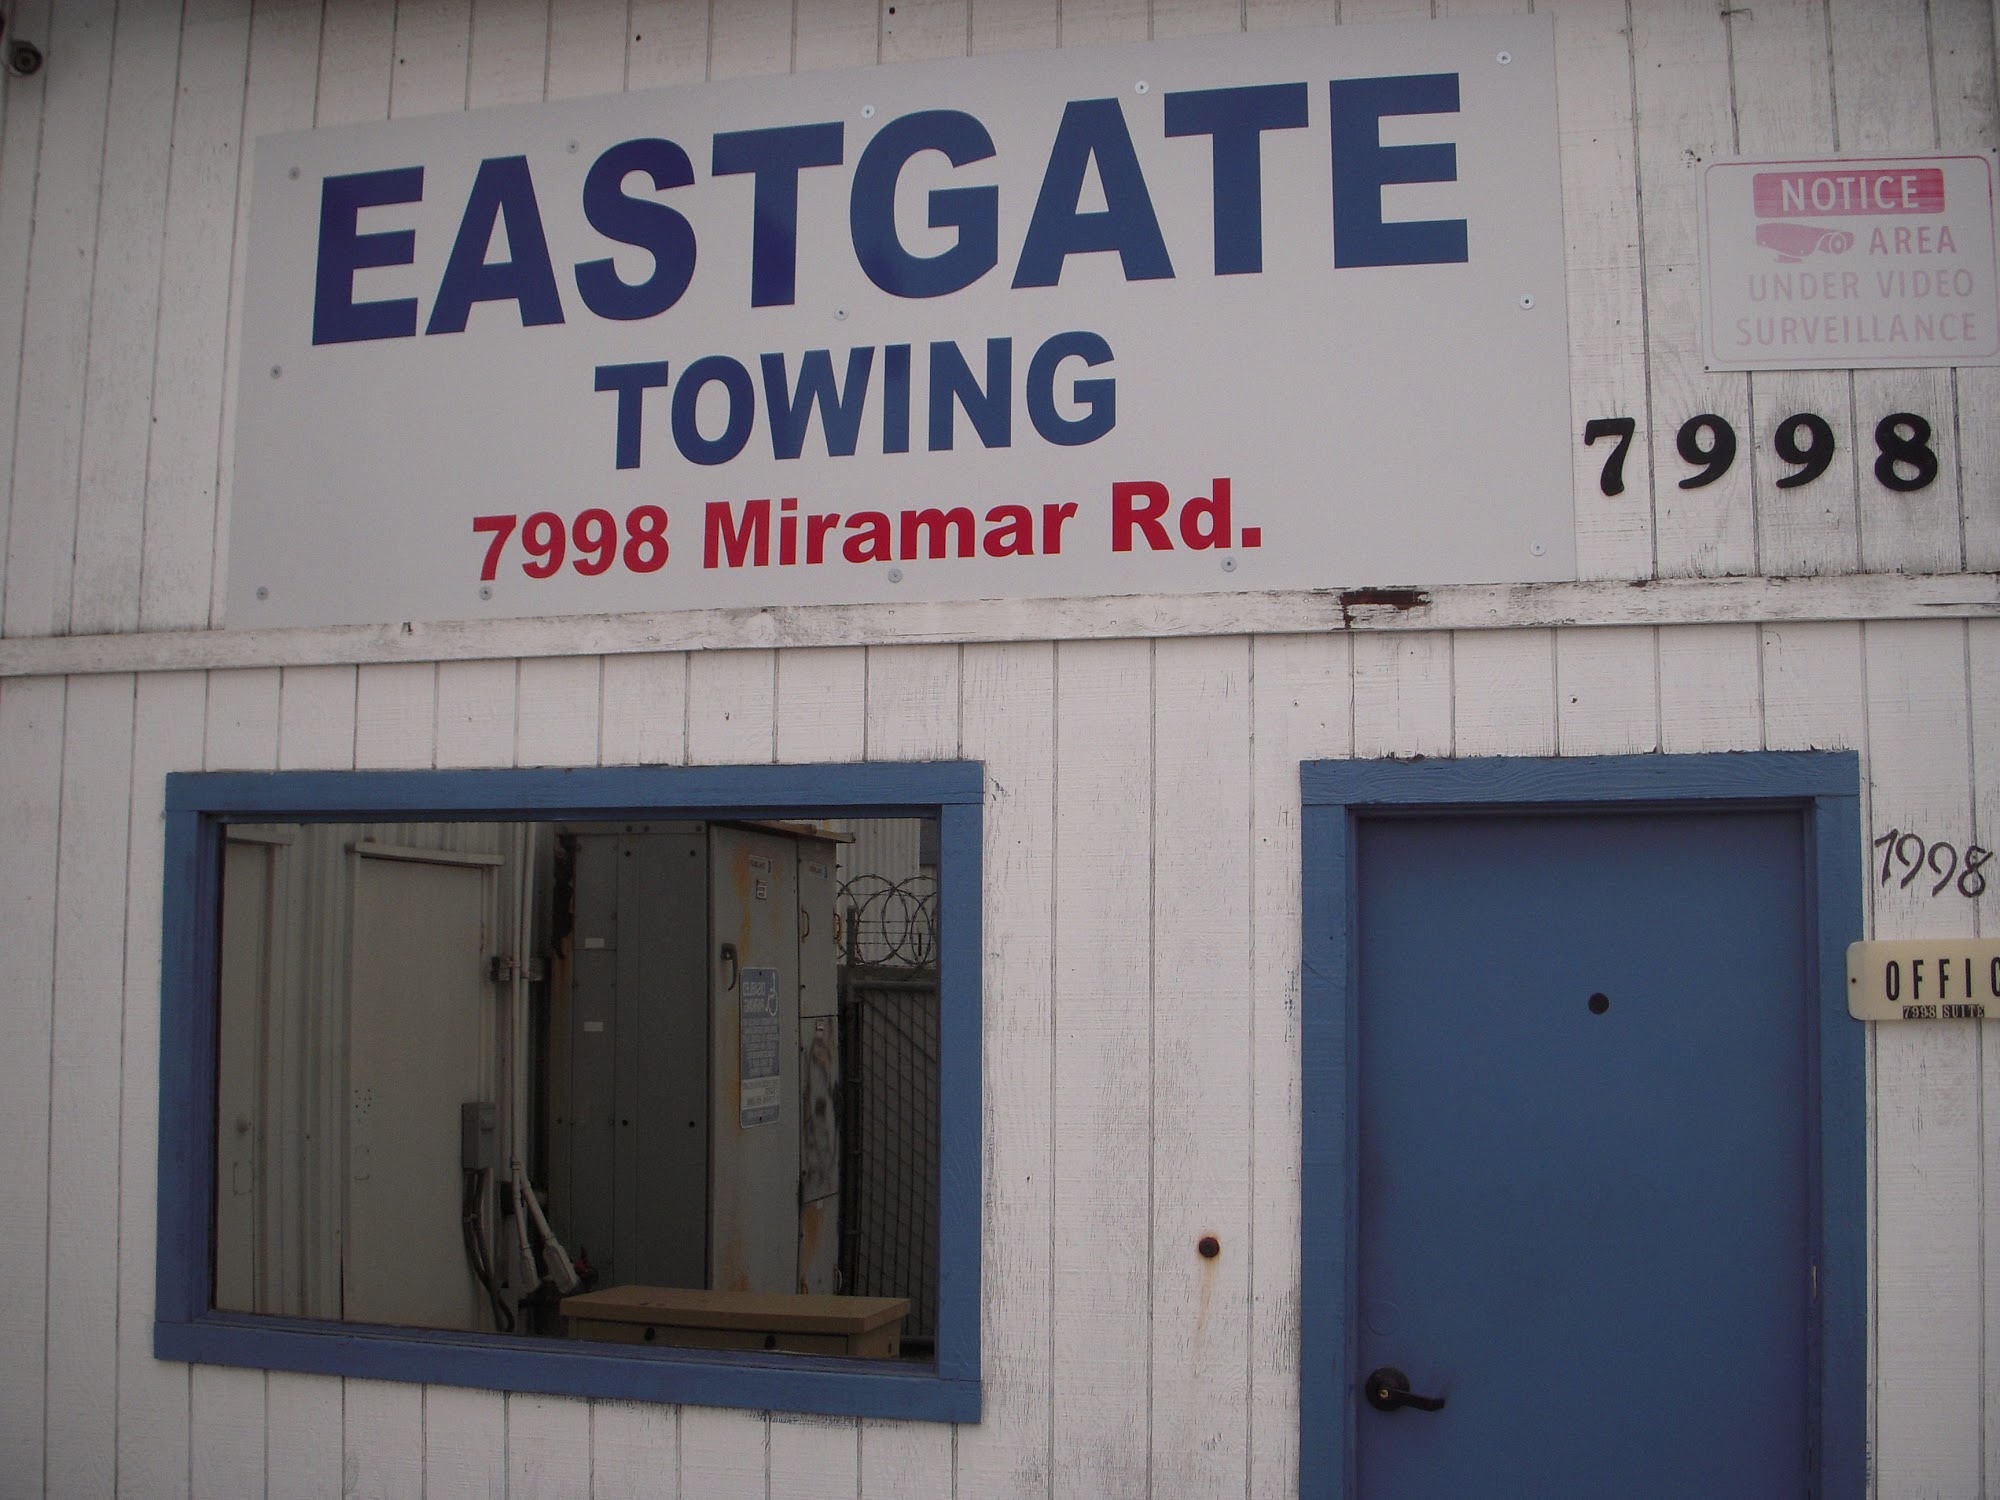 Eastgate Towing